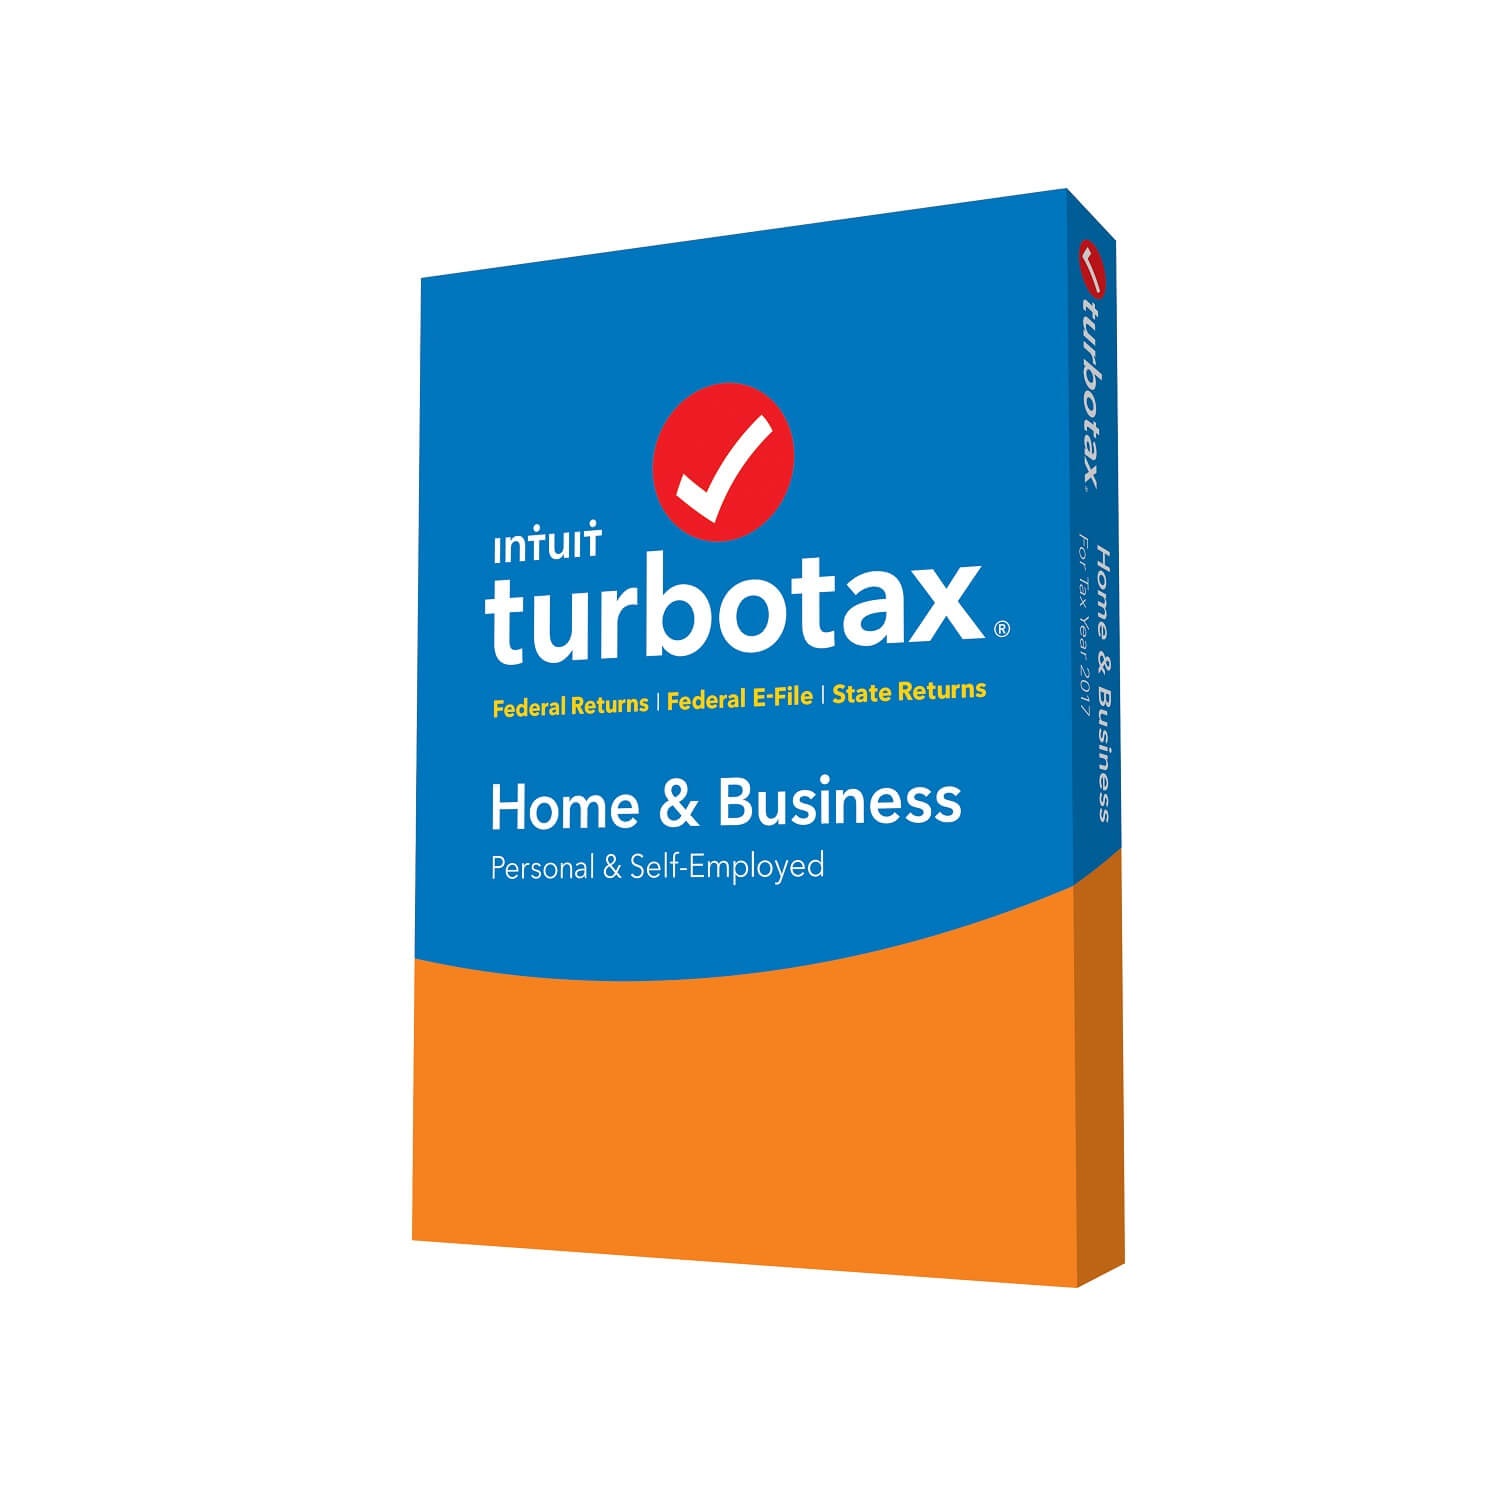 TurboTax Crack Full Version With Activation Code Free Download 2022